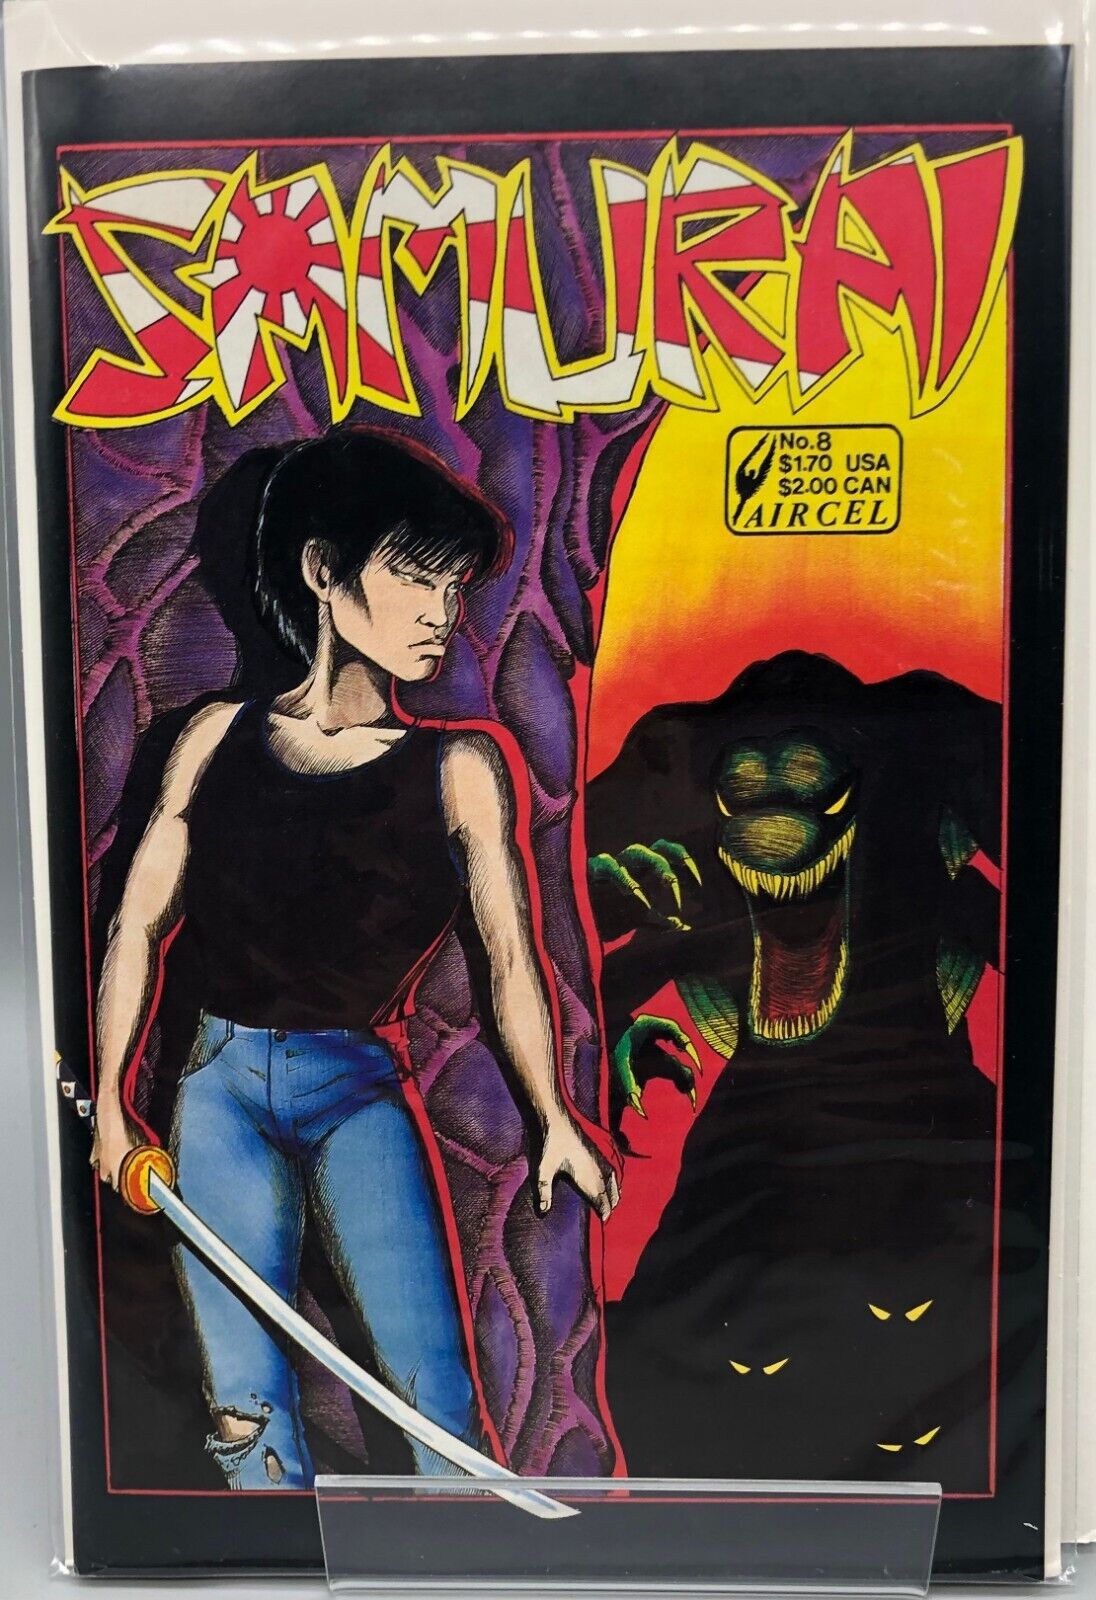 Samurai #8 Aircel Comics 1986 Vintage 9.4 - 9.8 NM Combined Shipping Barry Blair